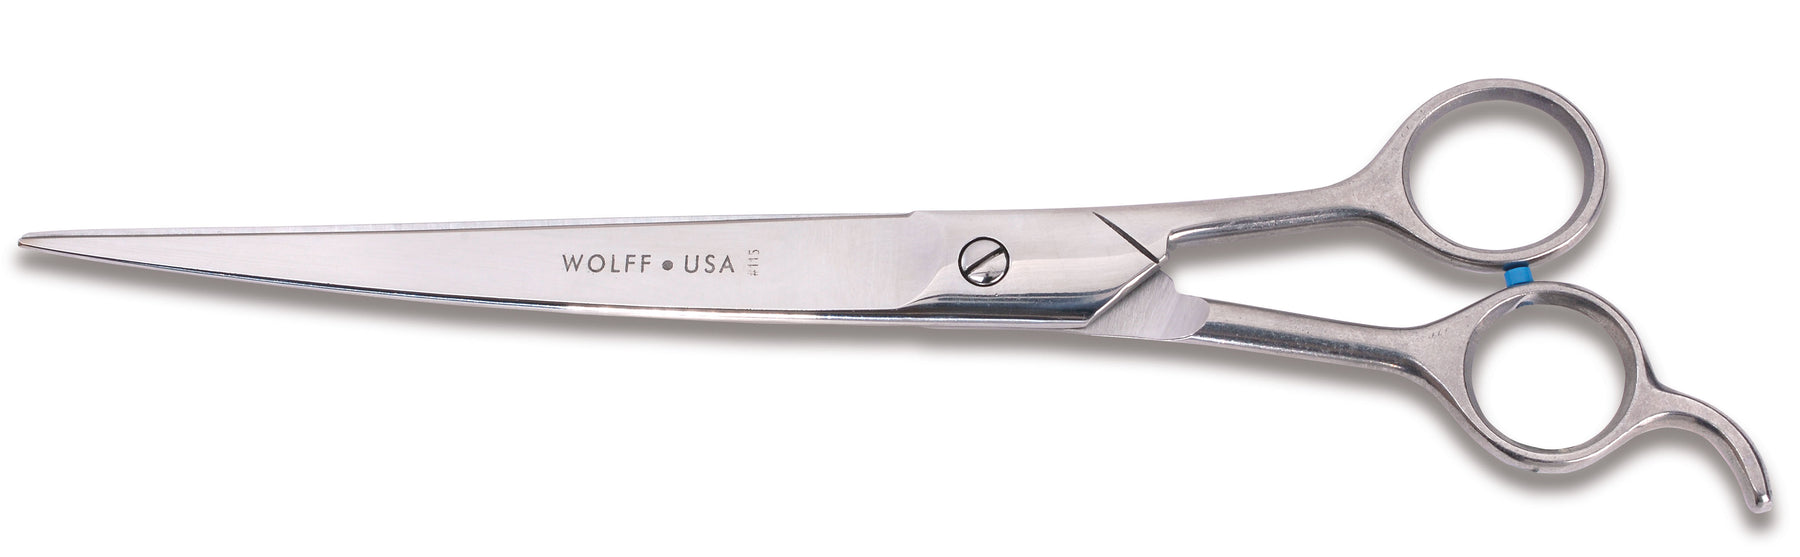 Wolff 10" Fillipino Style Grooming Shears with Bent Handles and Curved Blades